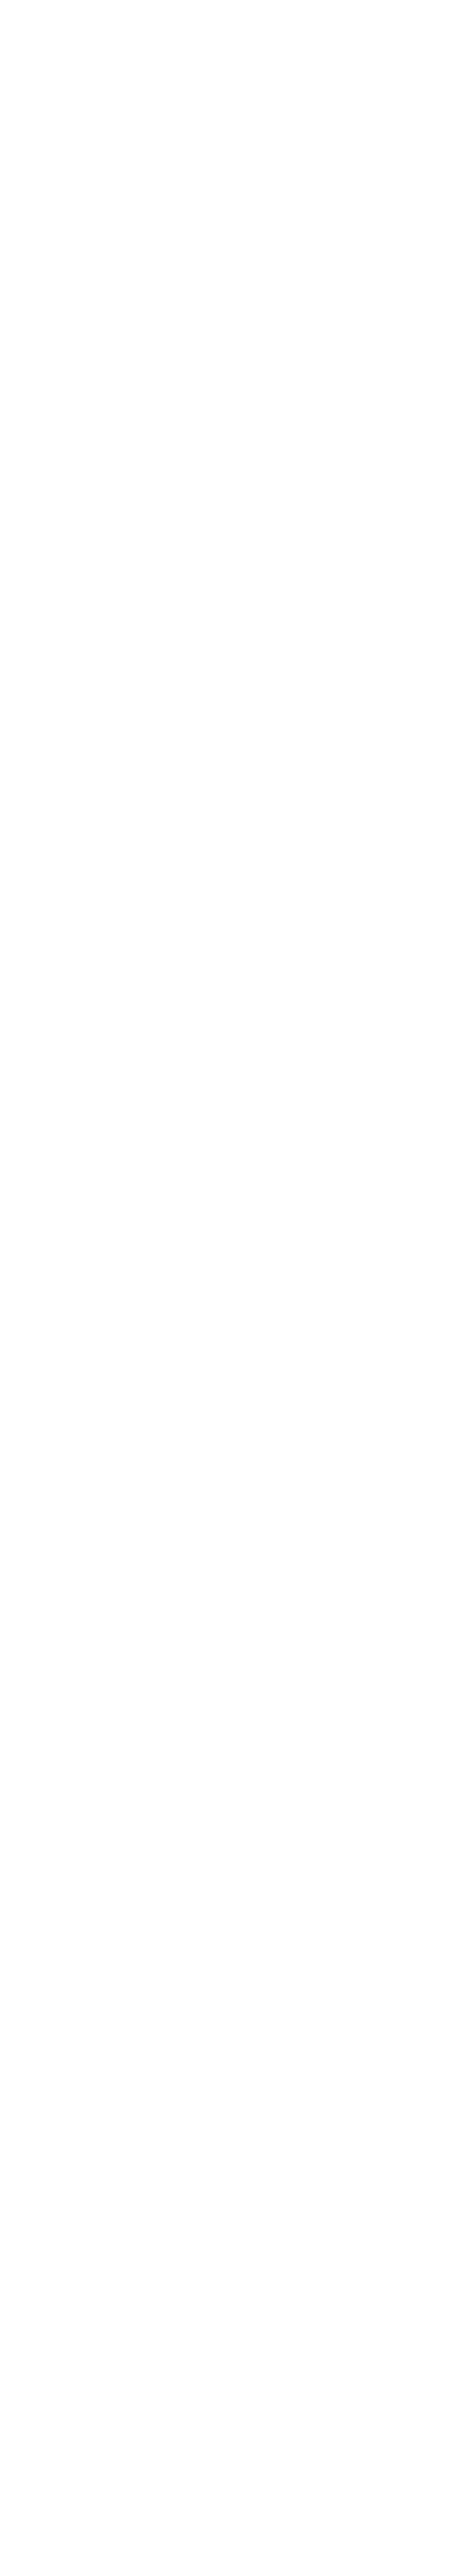 ClaraFusion support-frame/cistern